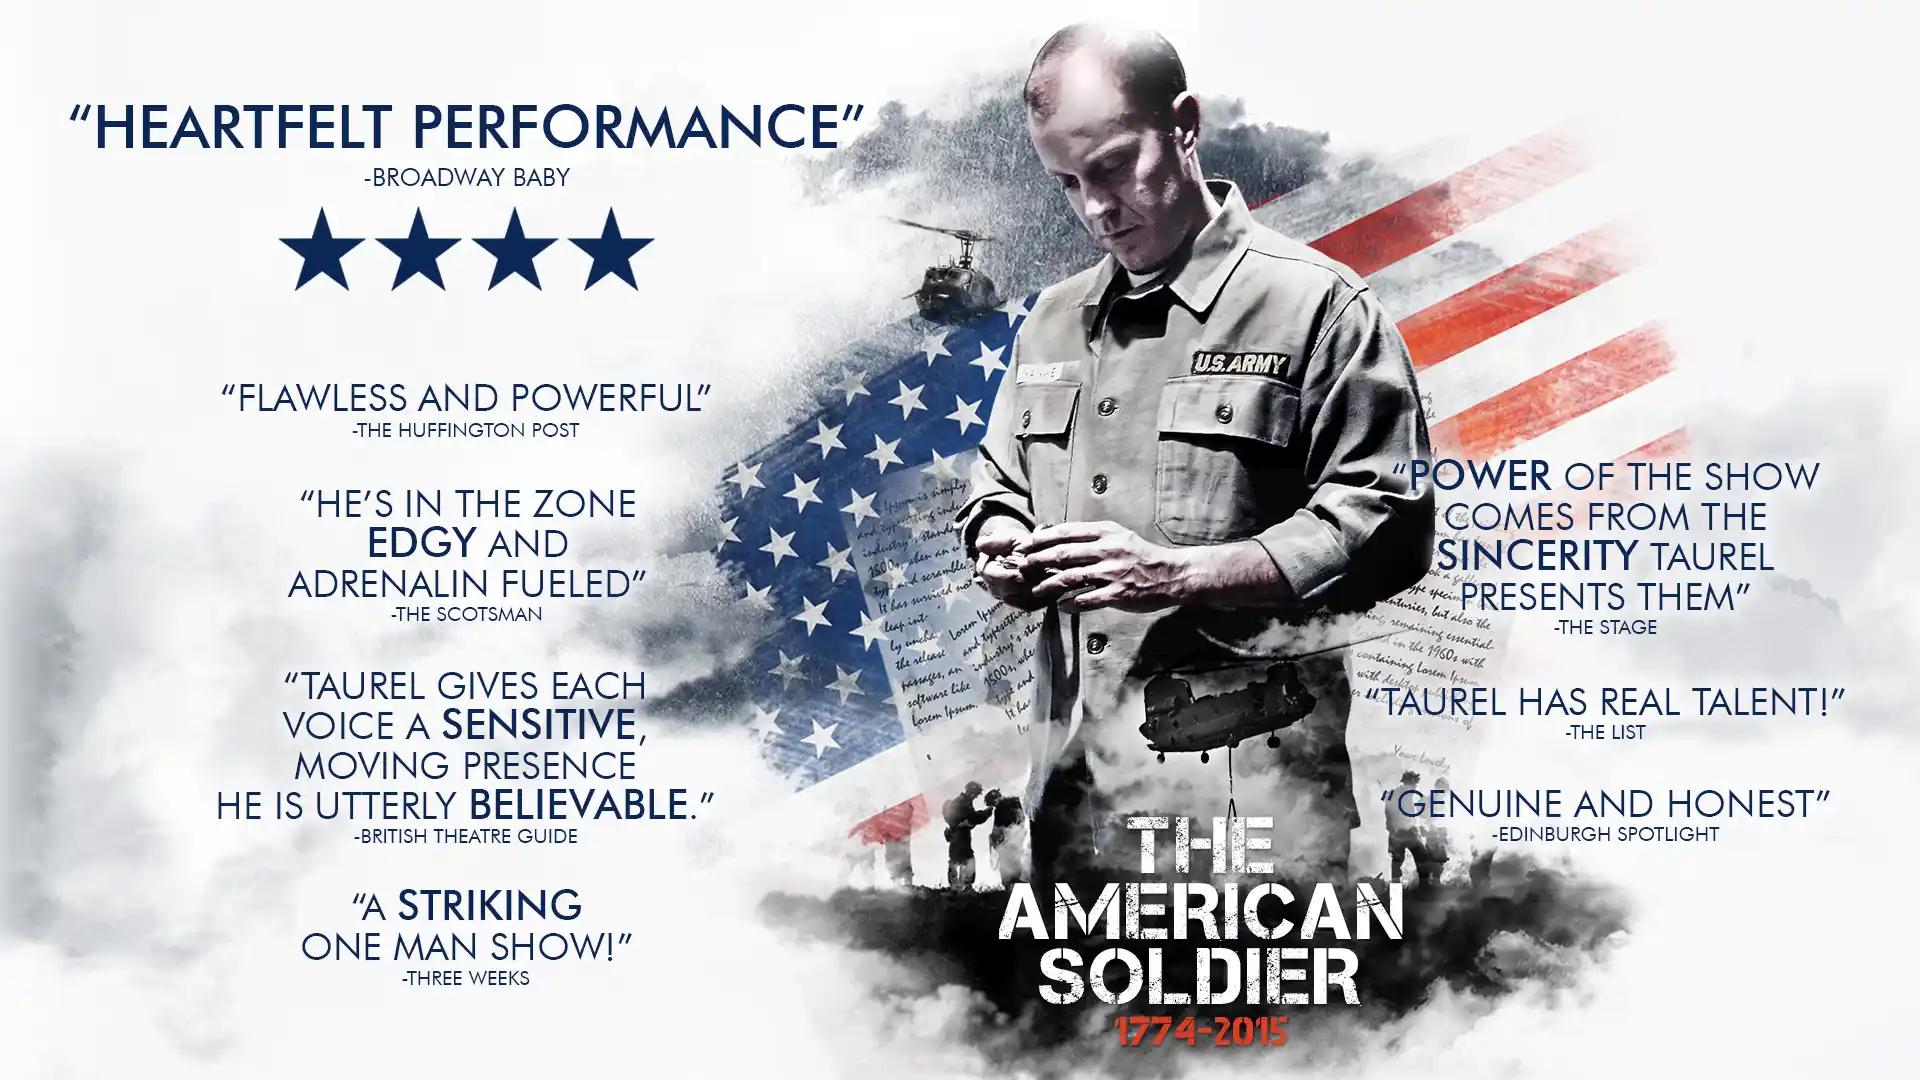 The American Soldier reviews